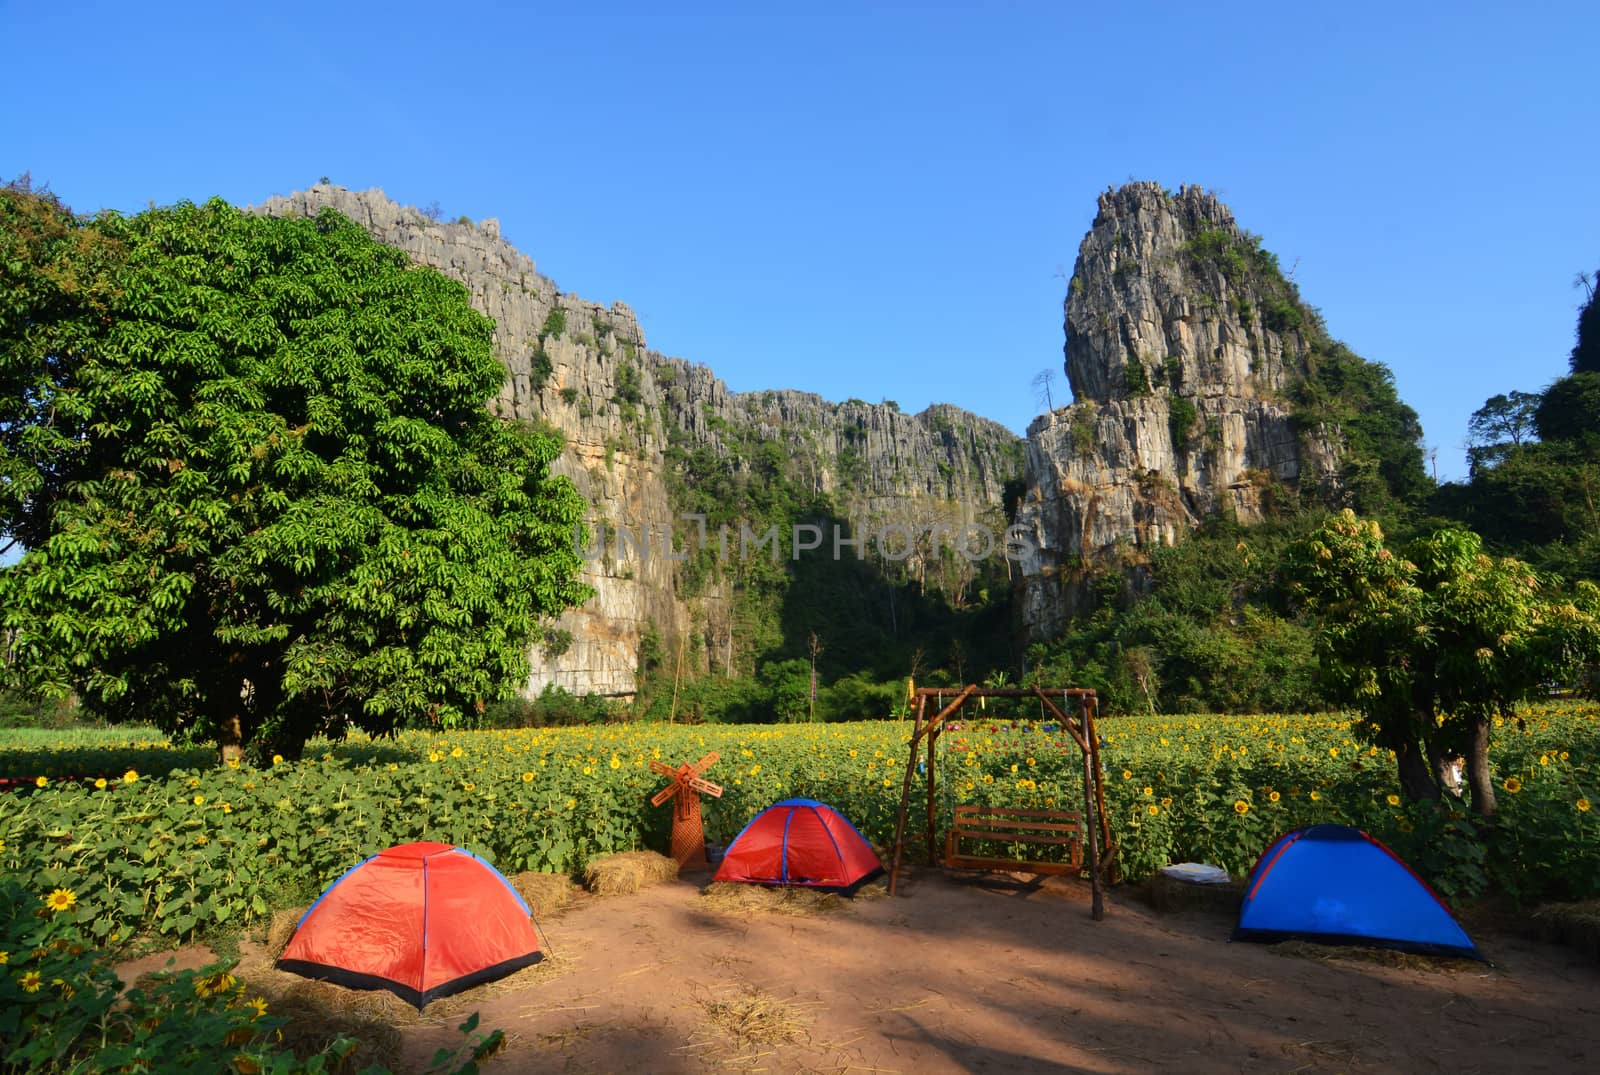 Orange, Red, Blue camping tent at Sunflower field, Ban Mung, Noen Maprang District, Phitsanulok Province, Thailand